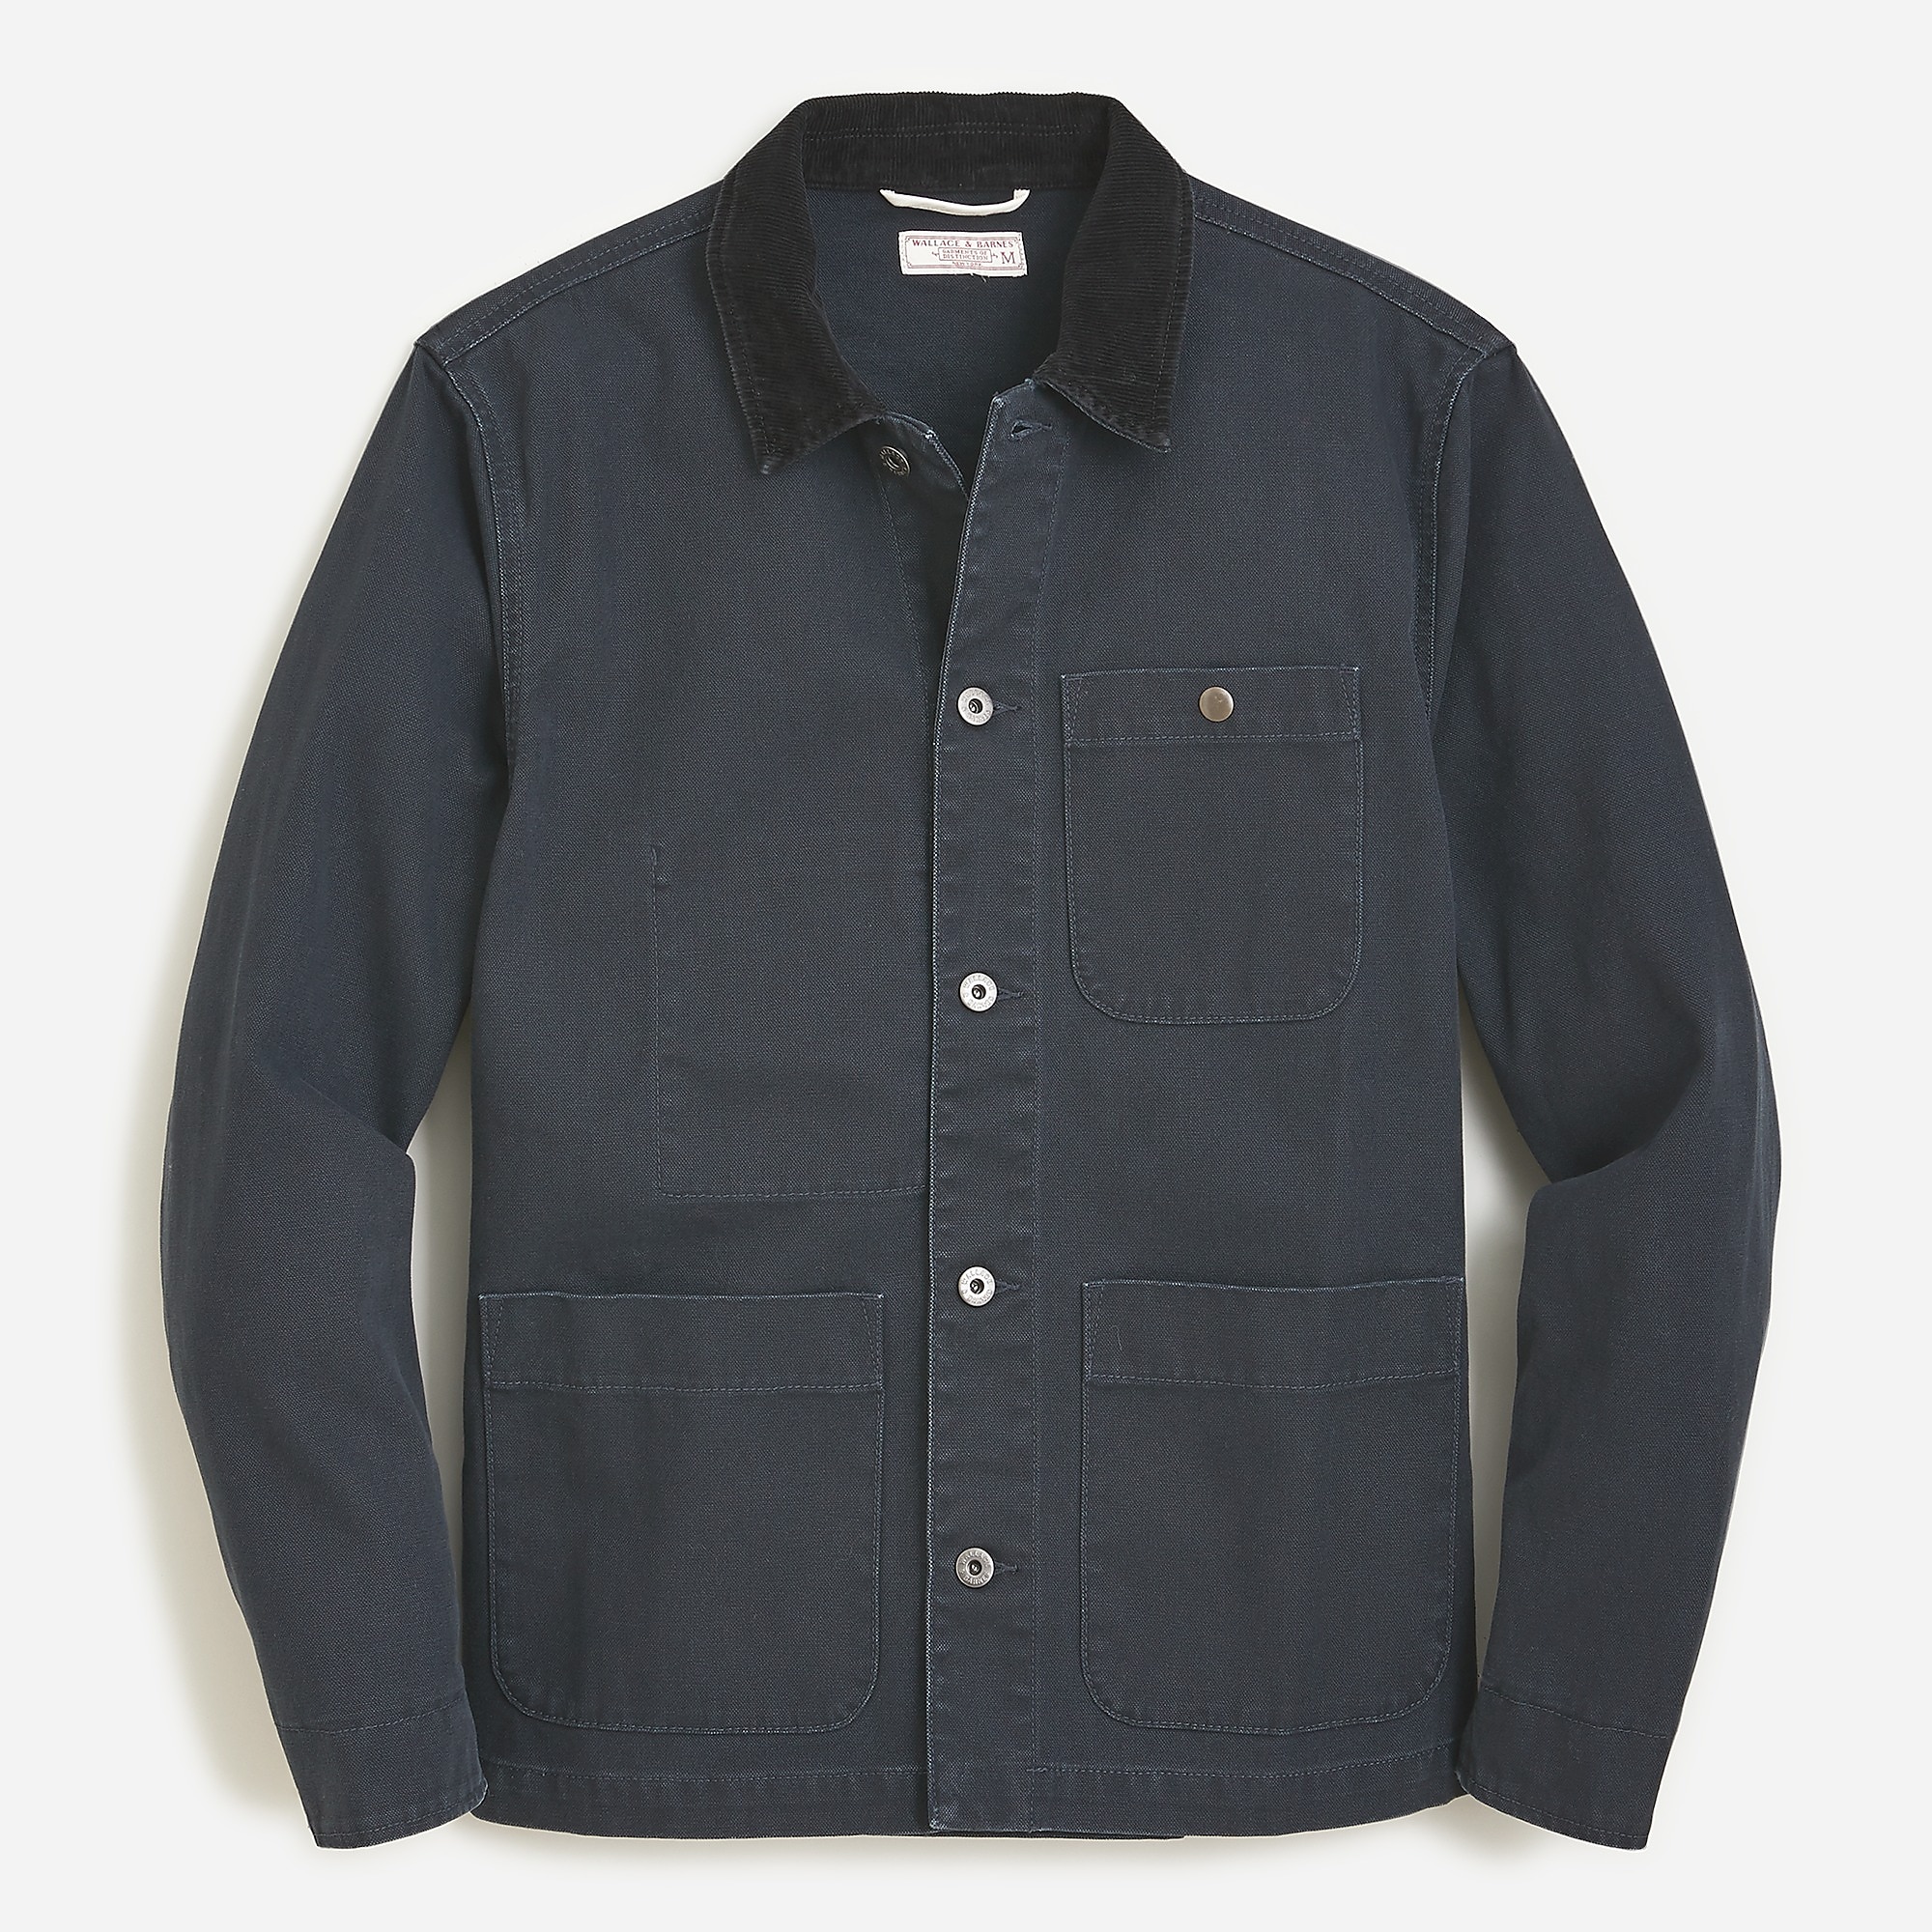 J.Crew: Wallace & Barnes Chore Jacket With Corduroy Collar For Men